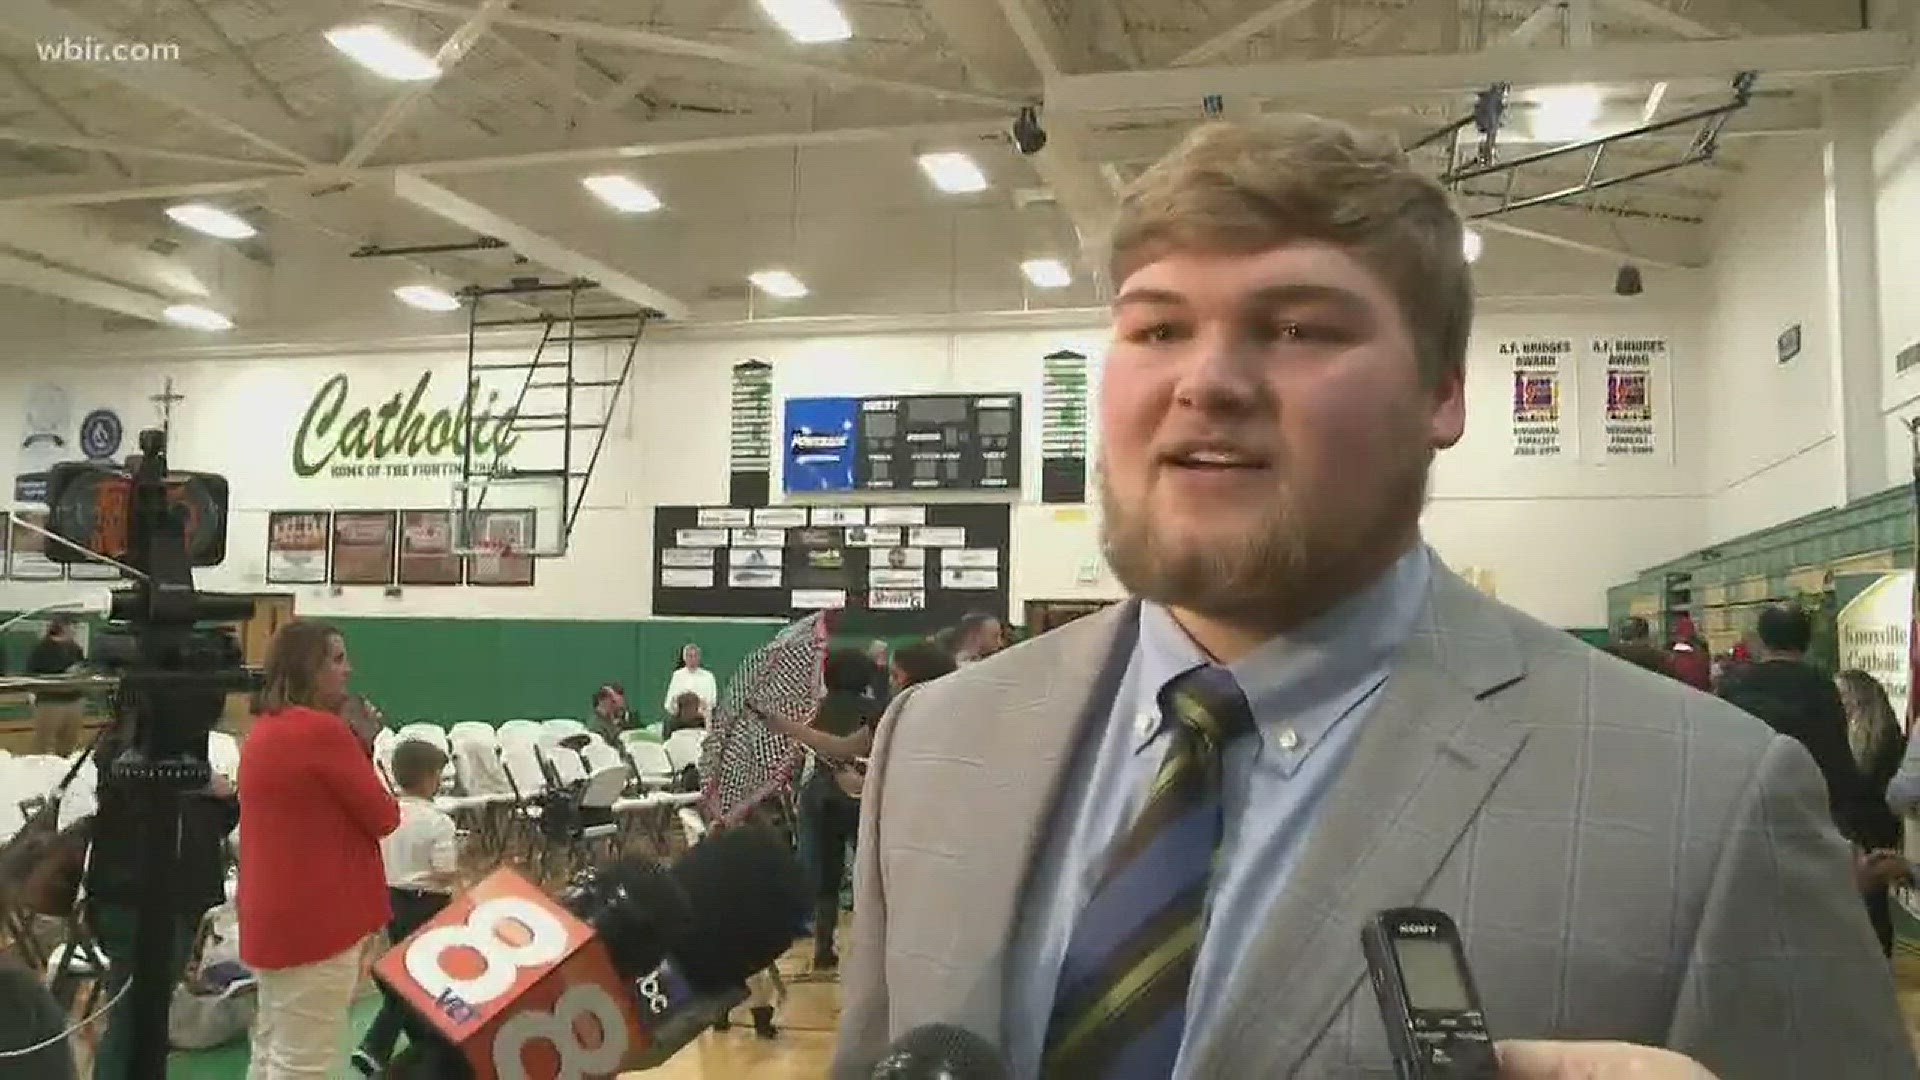 The elite offensive line prospect announced Wednesday he was signing with the Georgia Bulldogs. He decommitted from Tennessee several weeks ago.